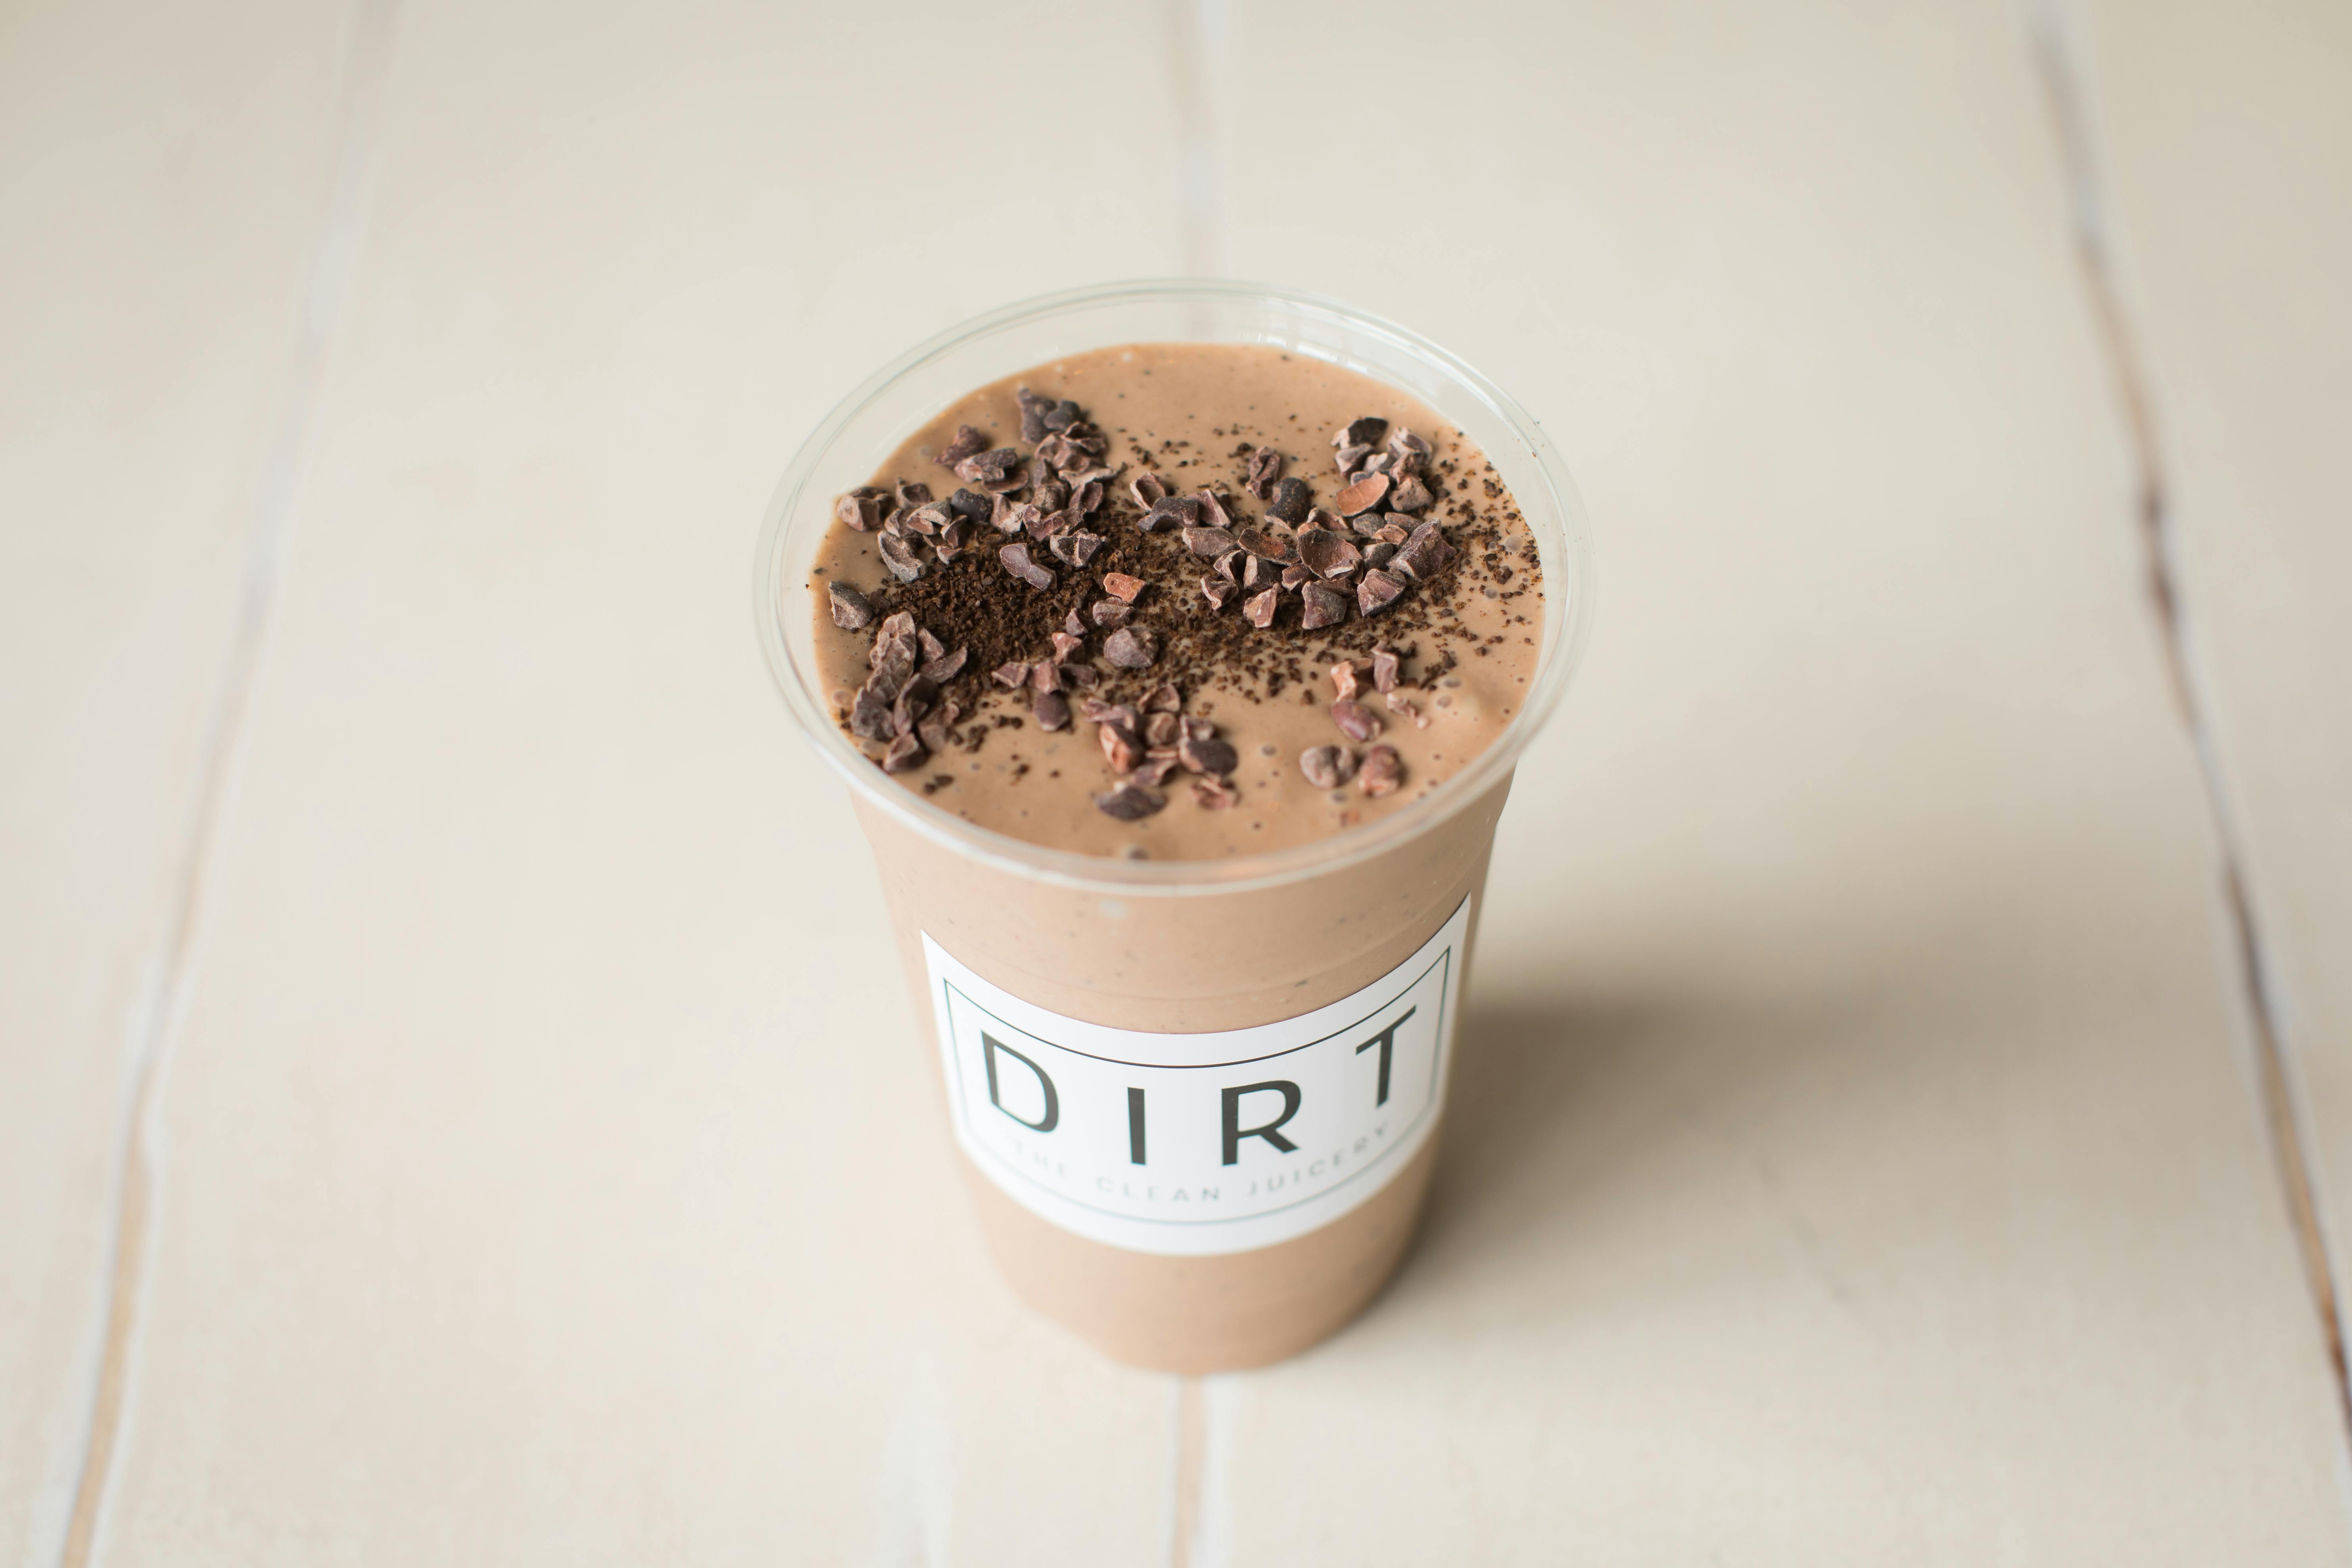 Chunky Monkey Moringa from Dirt Juicery - Lineville Rd in Green Bay, WI